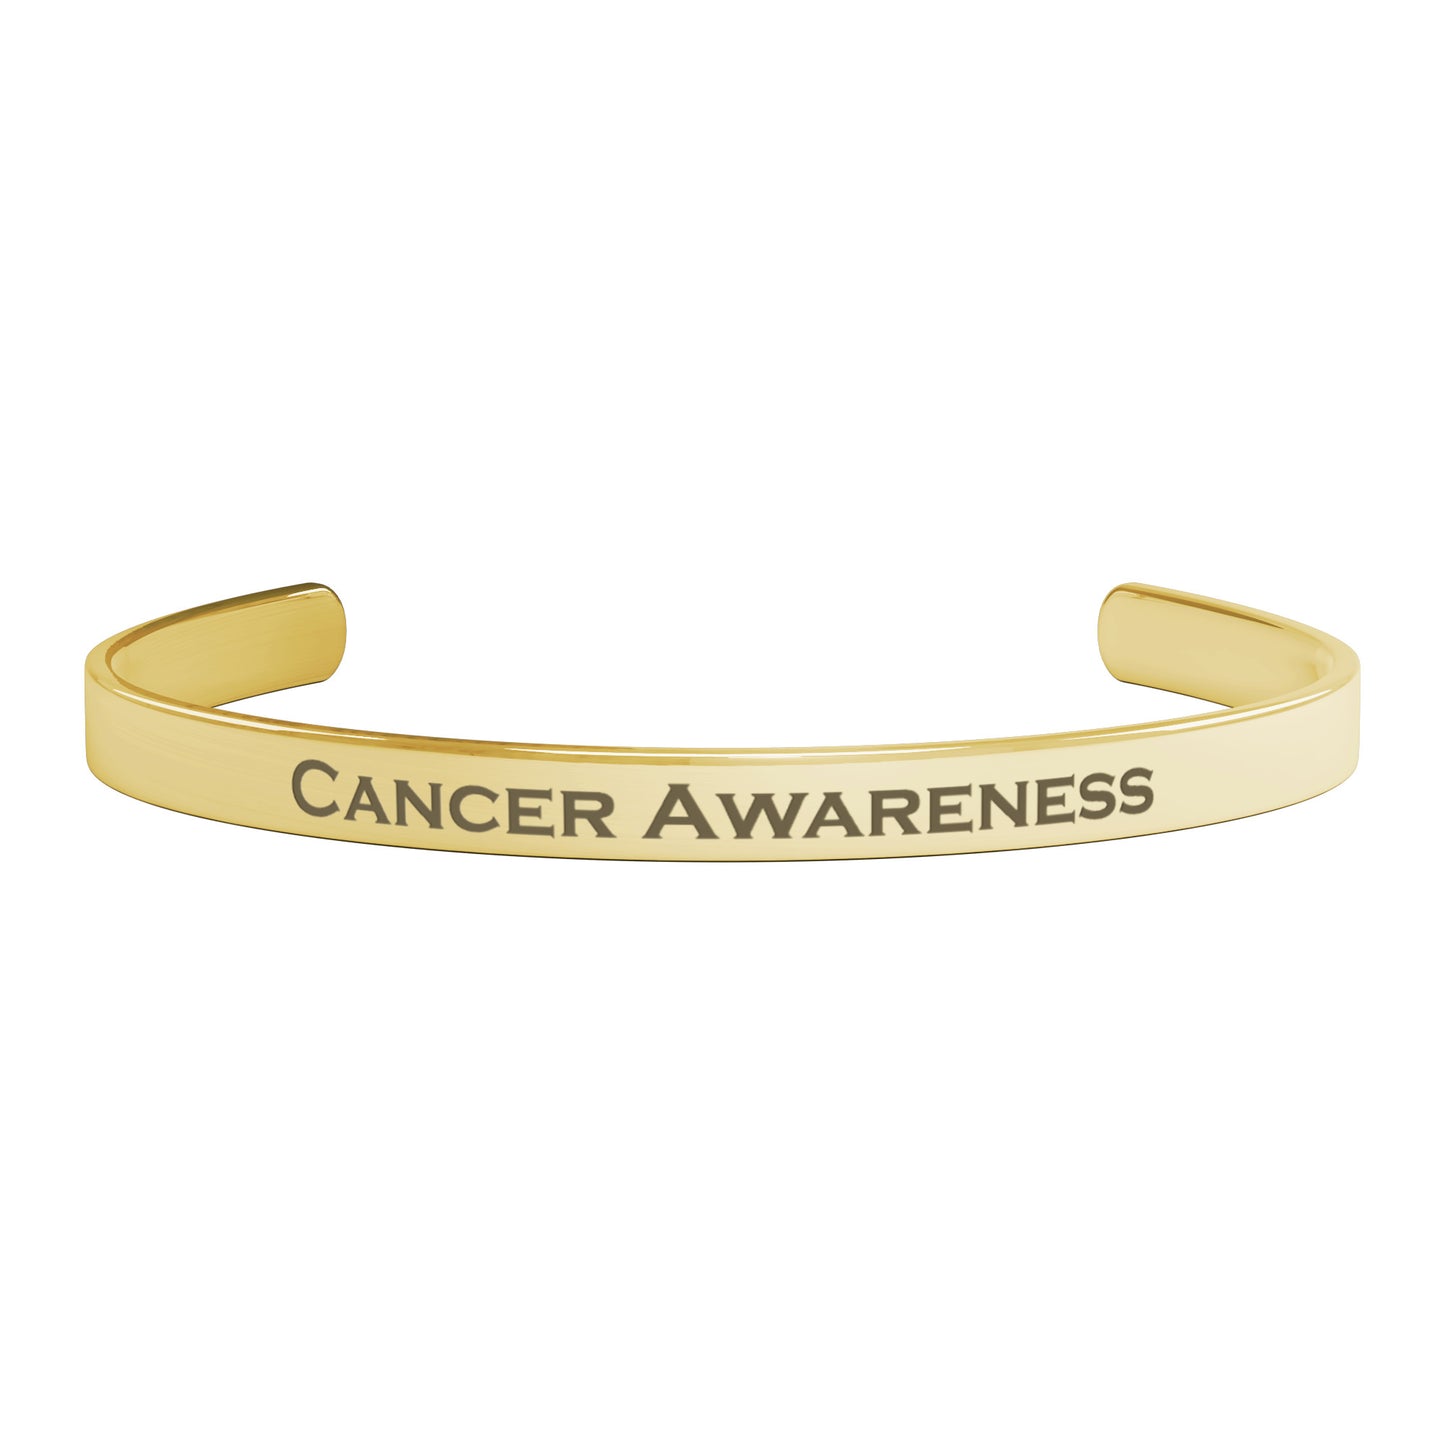 Personalized Cancer Awareness Cuff Bracelet